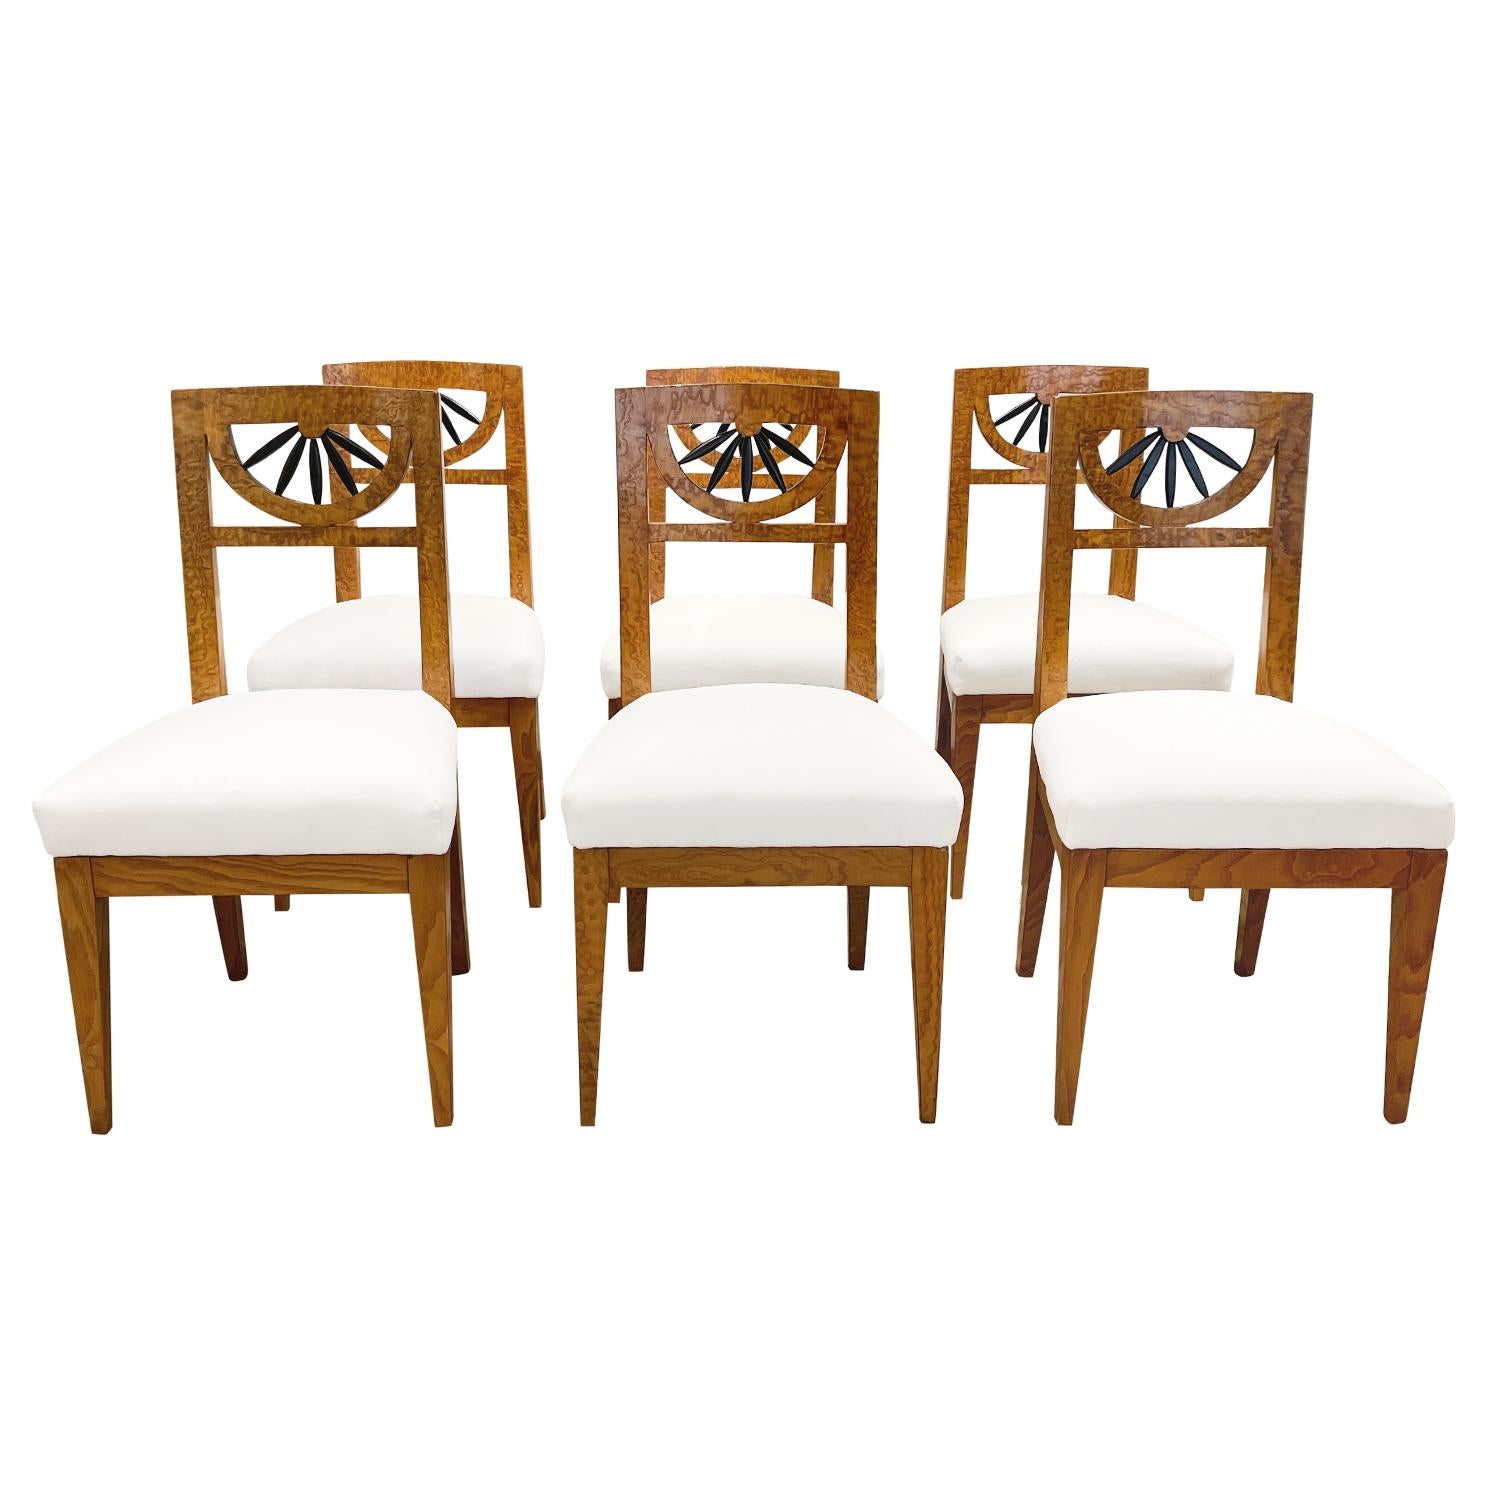 A light-brown, antique German Biedermeier set of six dining room chairs made of handcrafted polished, partly veneered Birchwood, in good condition. The detailed side chairs have an open, arched backrest enhanced by detailed flower carvings which is